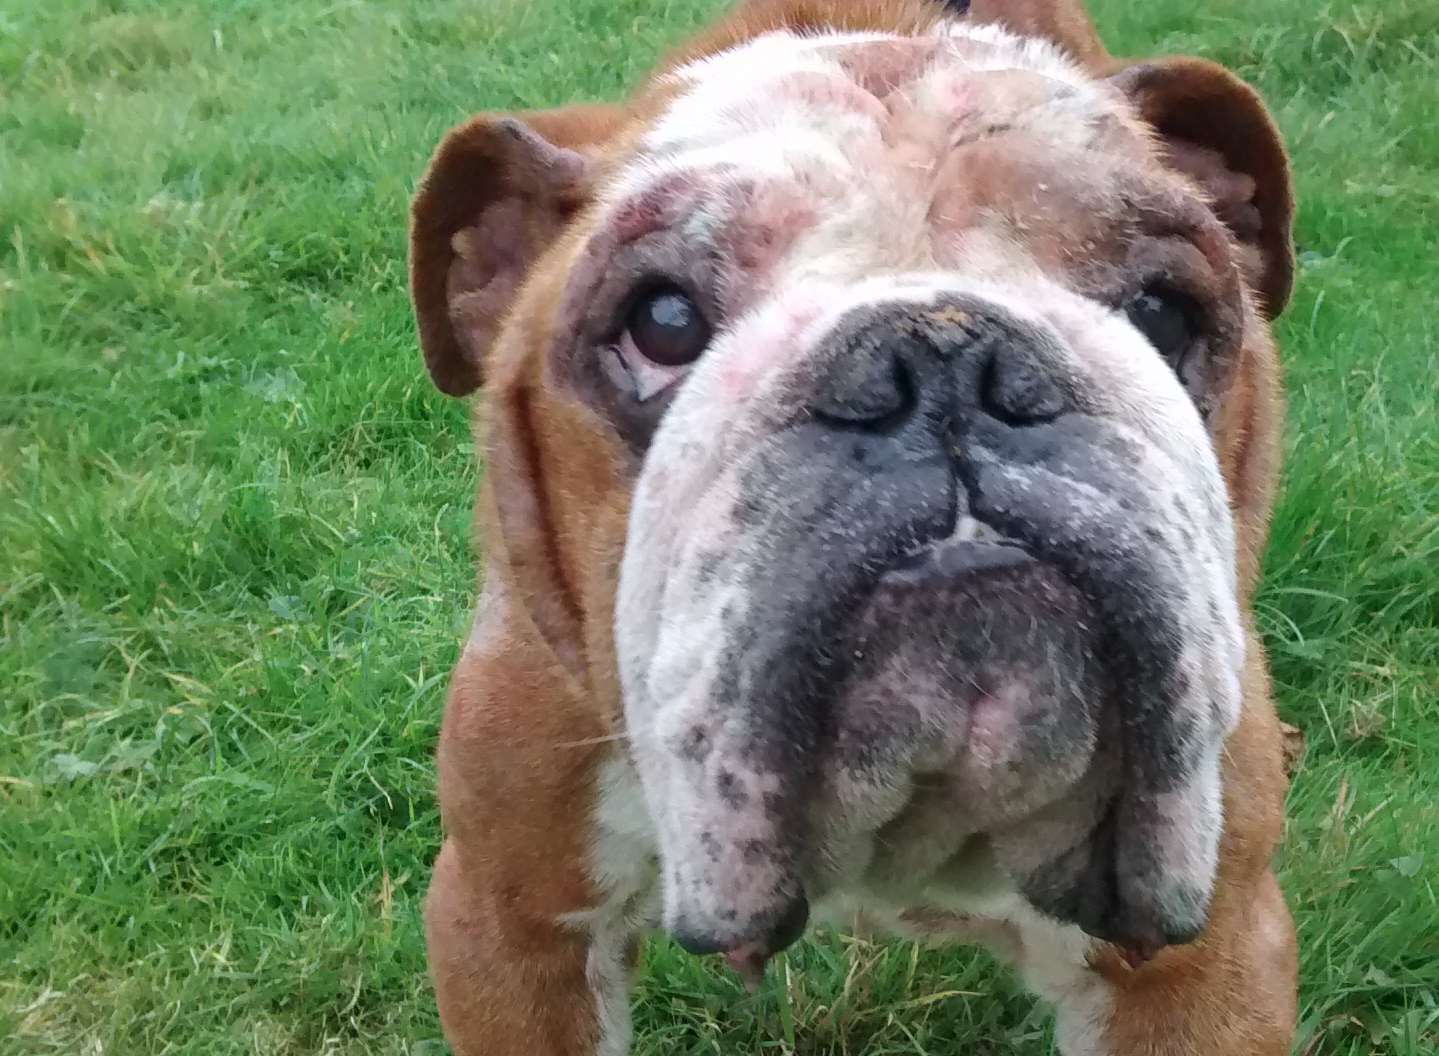 Spencer the British bulldog was found in a man's garden helping himself to cat food. Picture: RSPCA